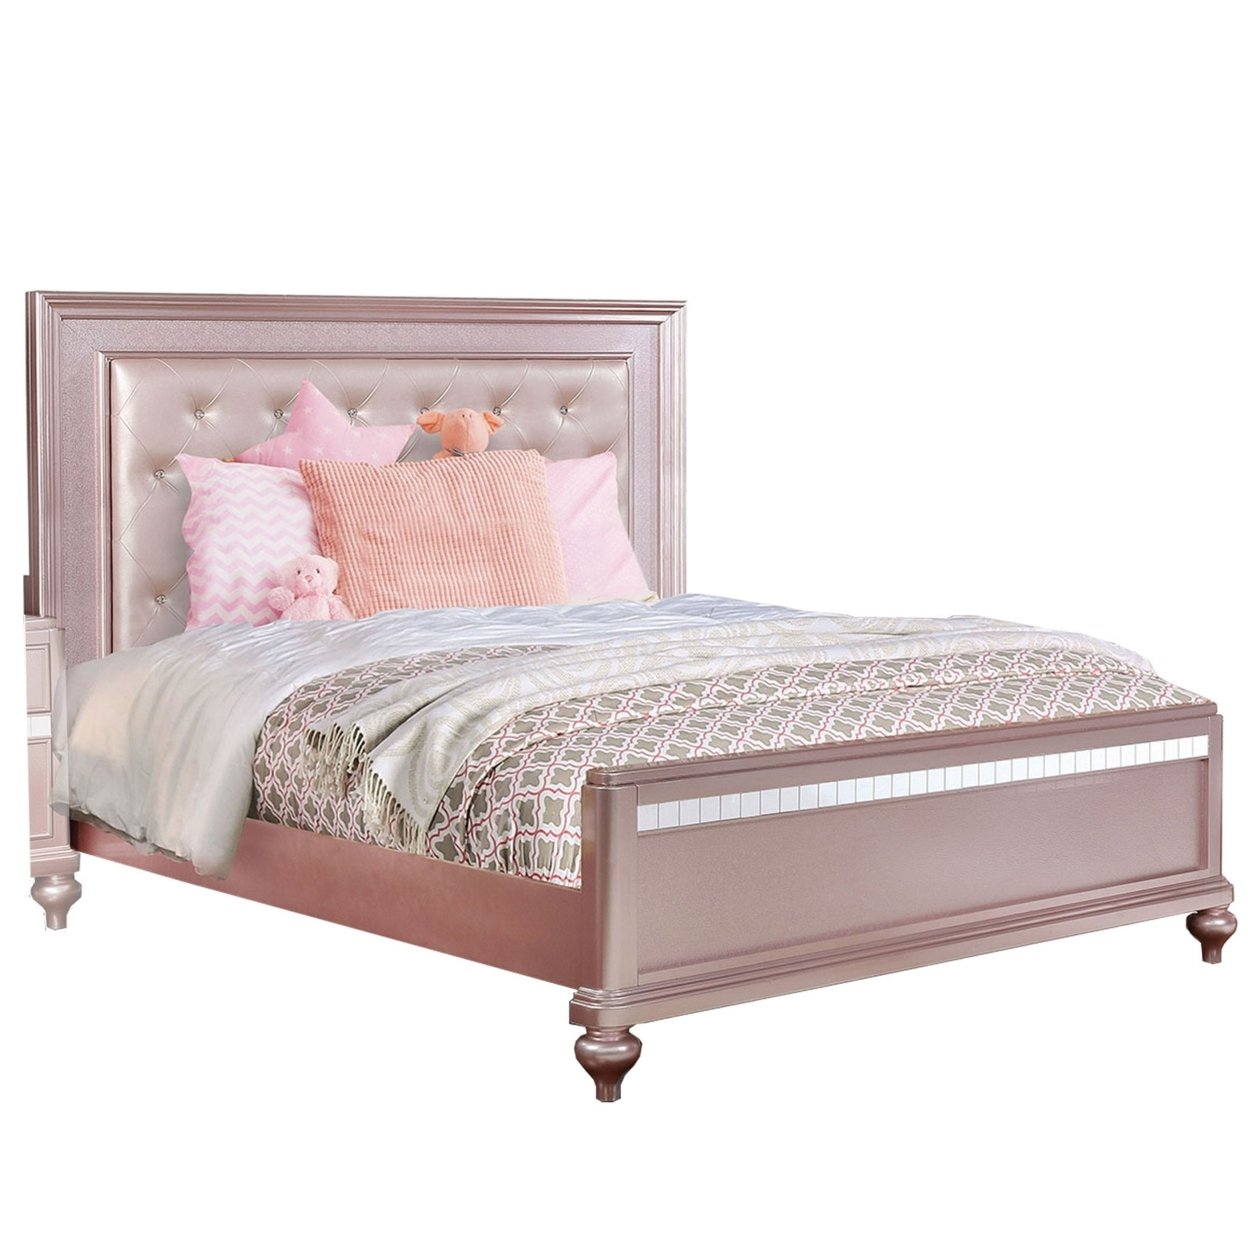 Button Tufted Full Size Bed With Leatherette Headboard, Rose Gold- Saltoro Sherpi